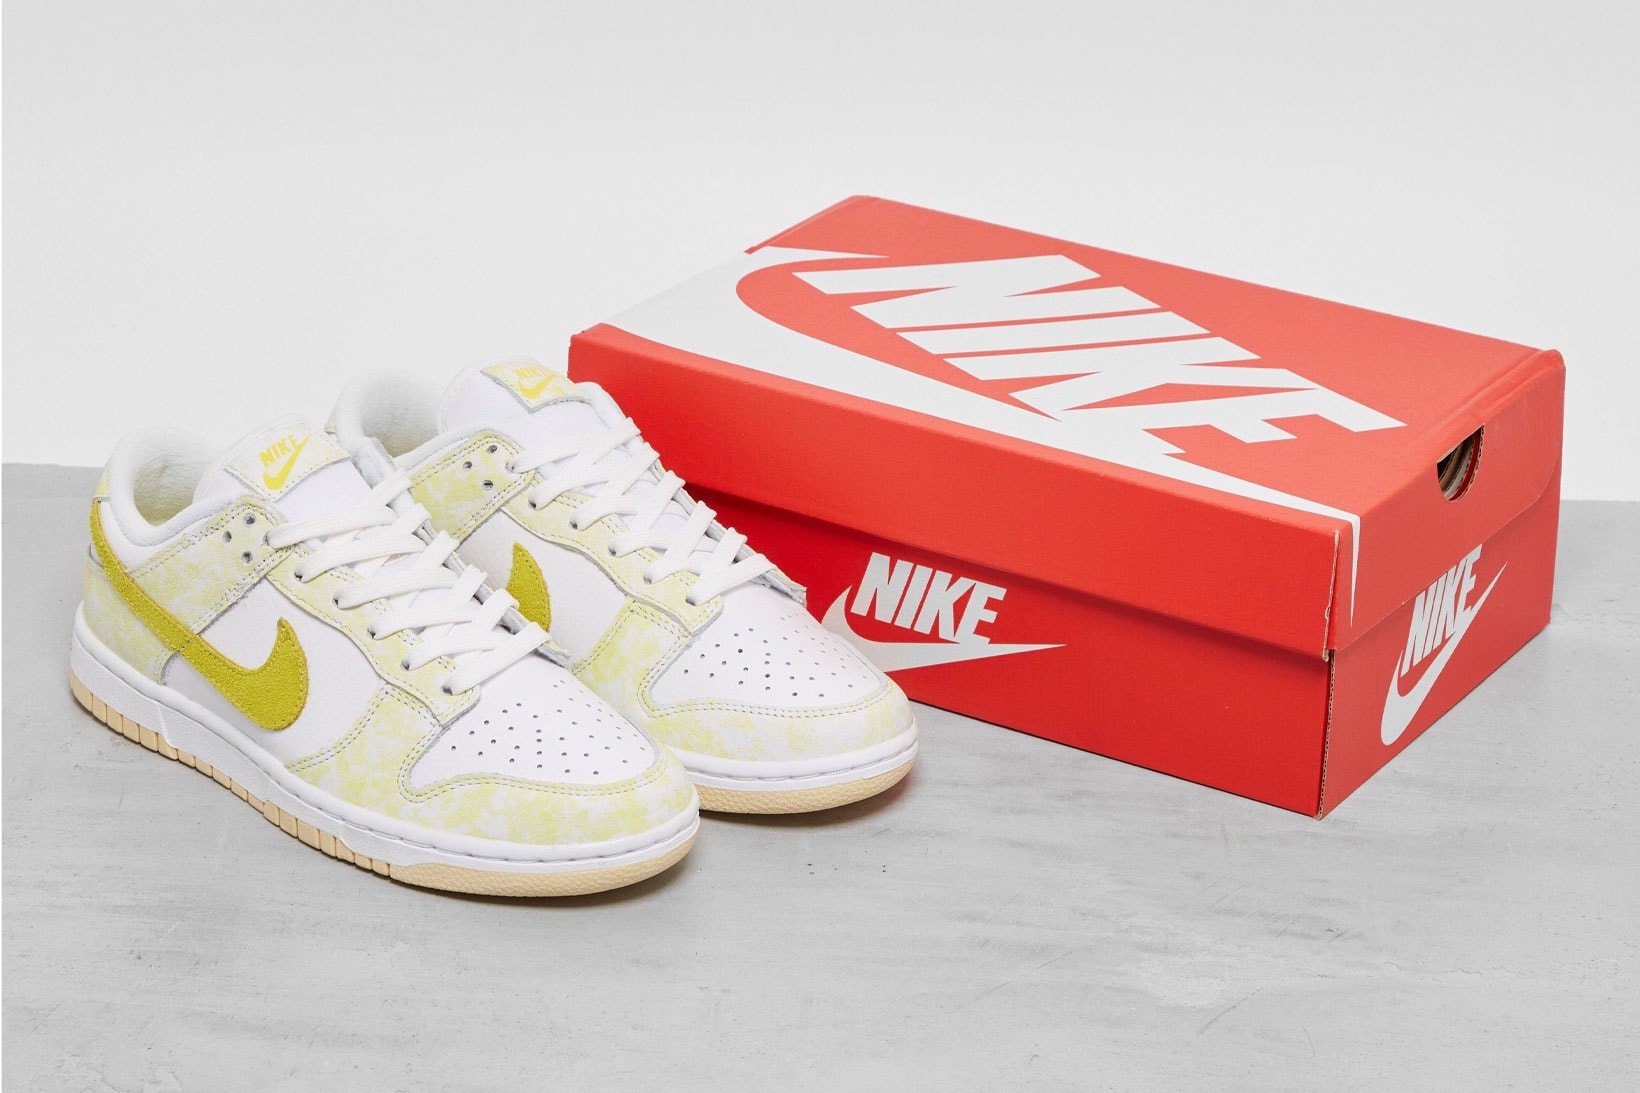 nike dunk low sneakers yellow strike details official look images box packaging